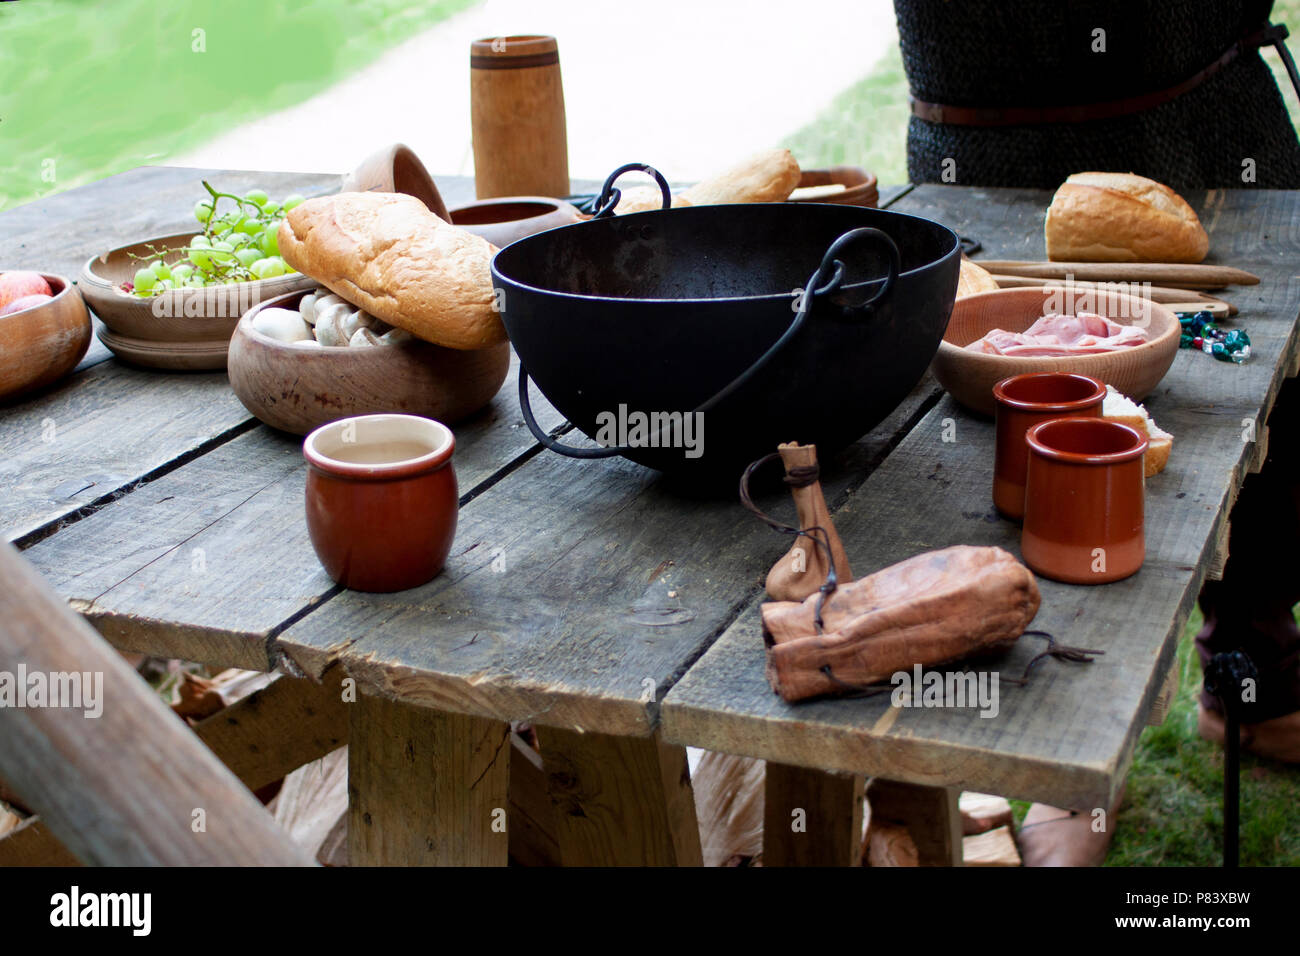 Traditional medieval or viking food on a wooden table Stock Photo